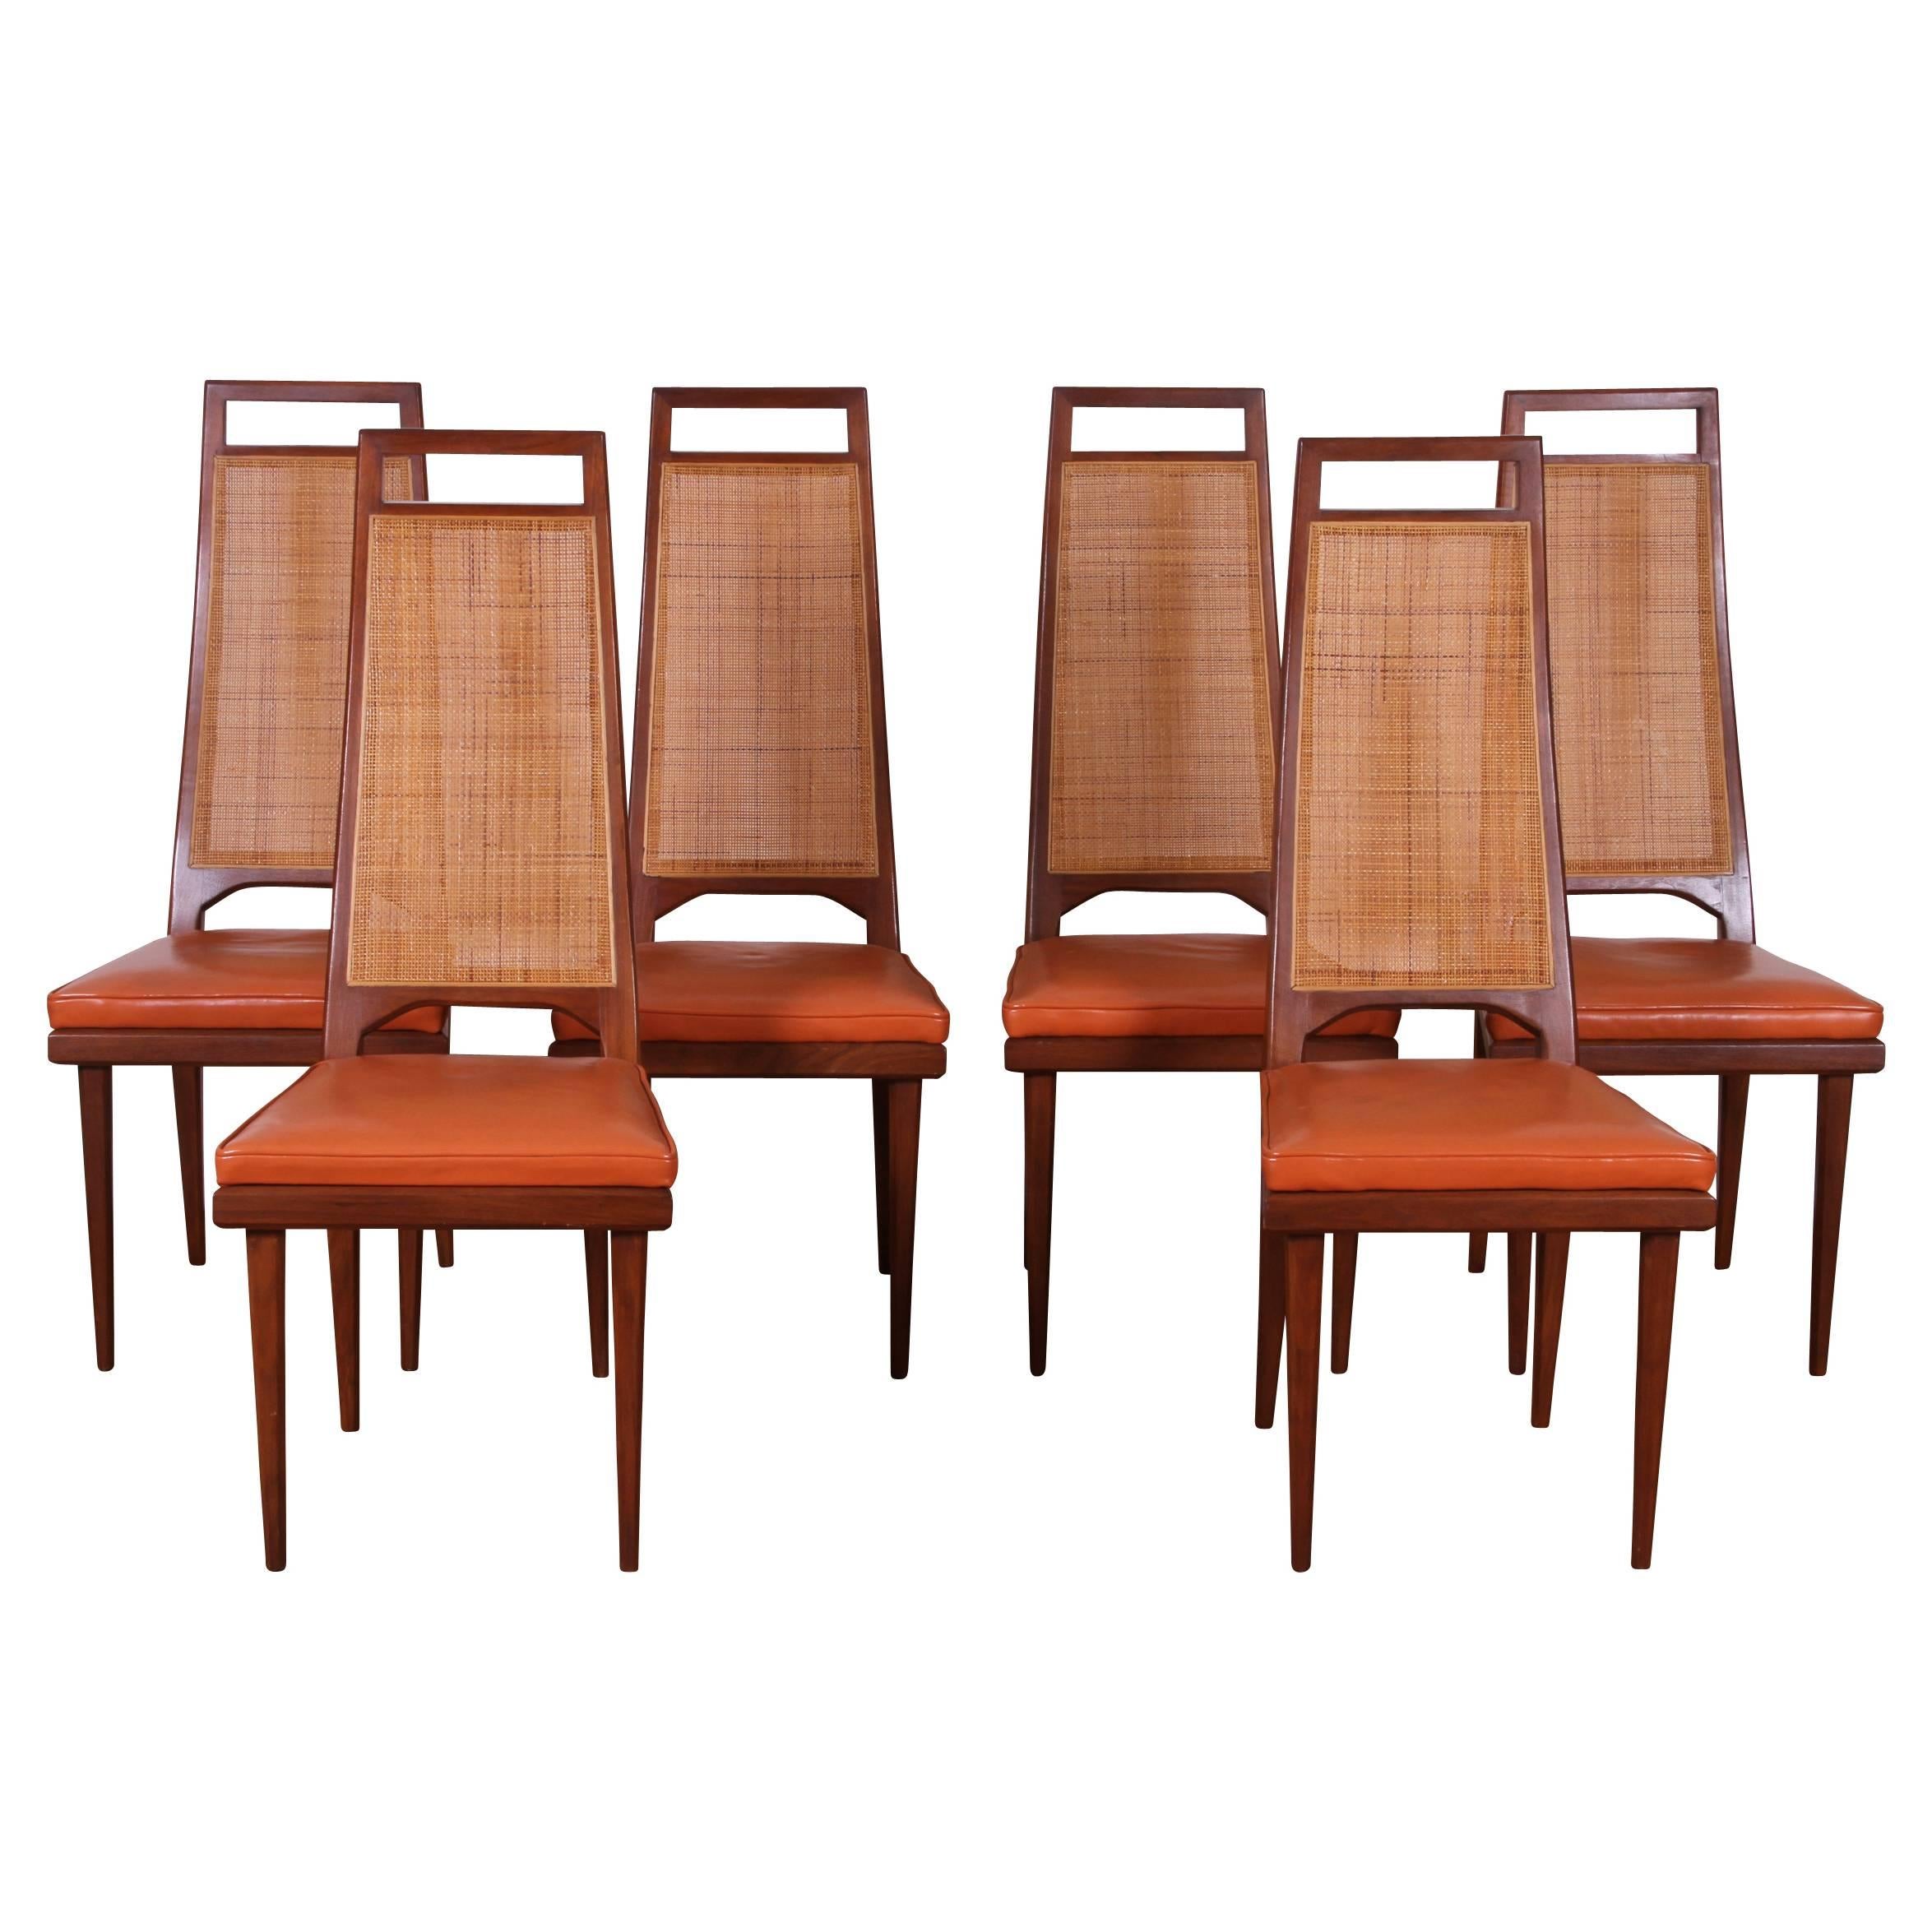 Set of Six Mid-Century Cane-Back Dining Chairs by Urban Furniture